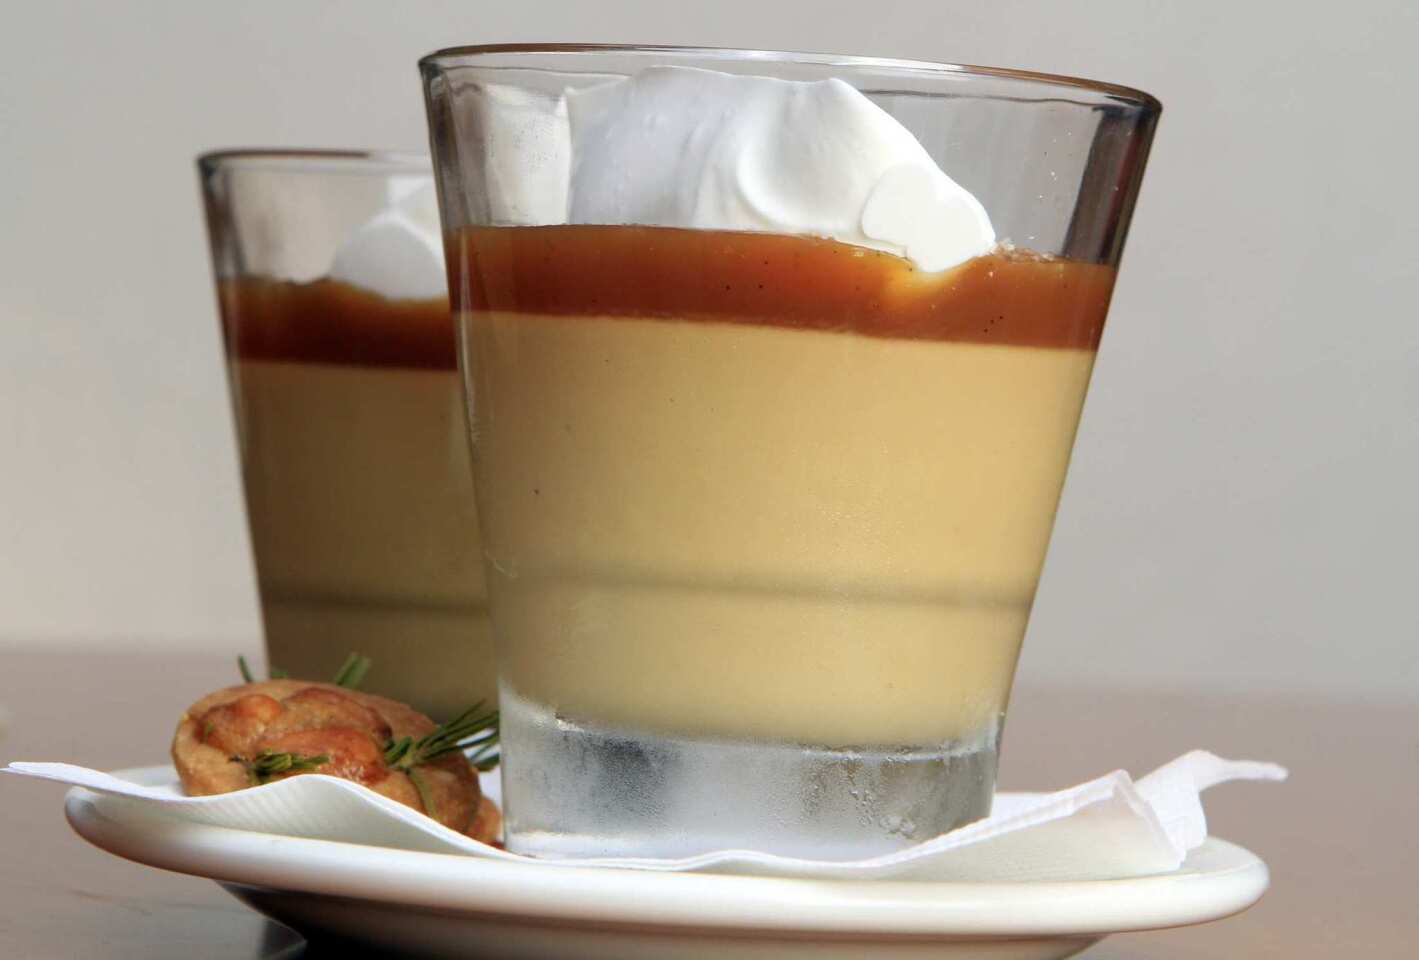 The sweetness of the butterscotch budino plays against the Maldon sea salt.